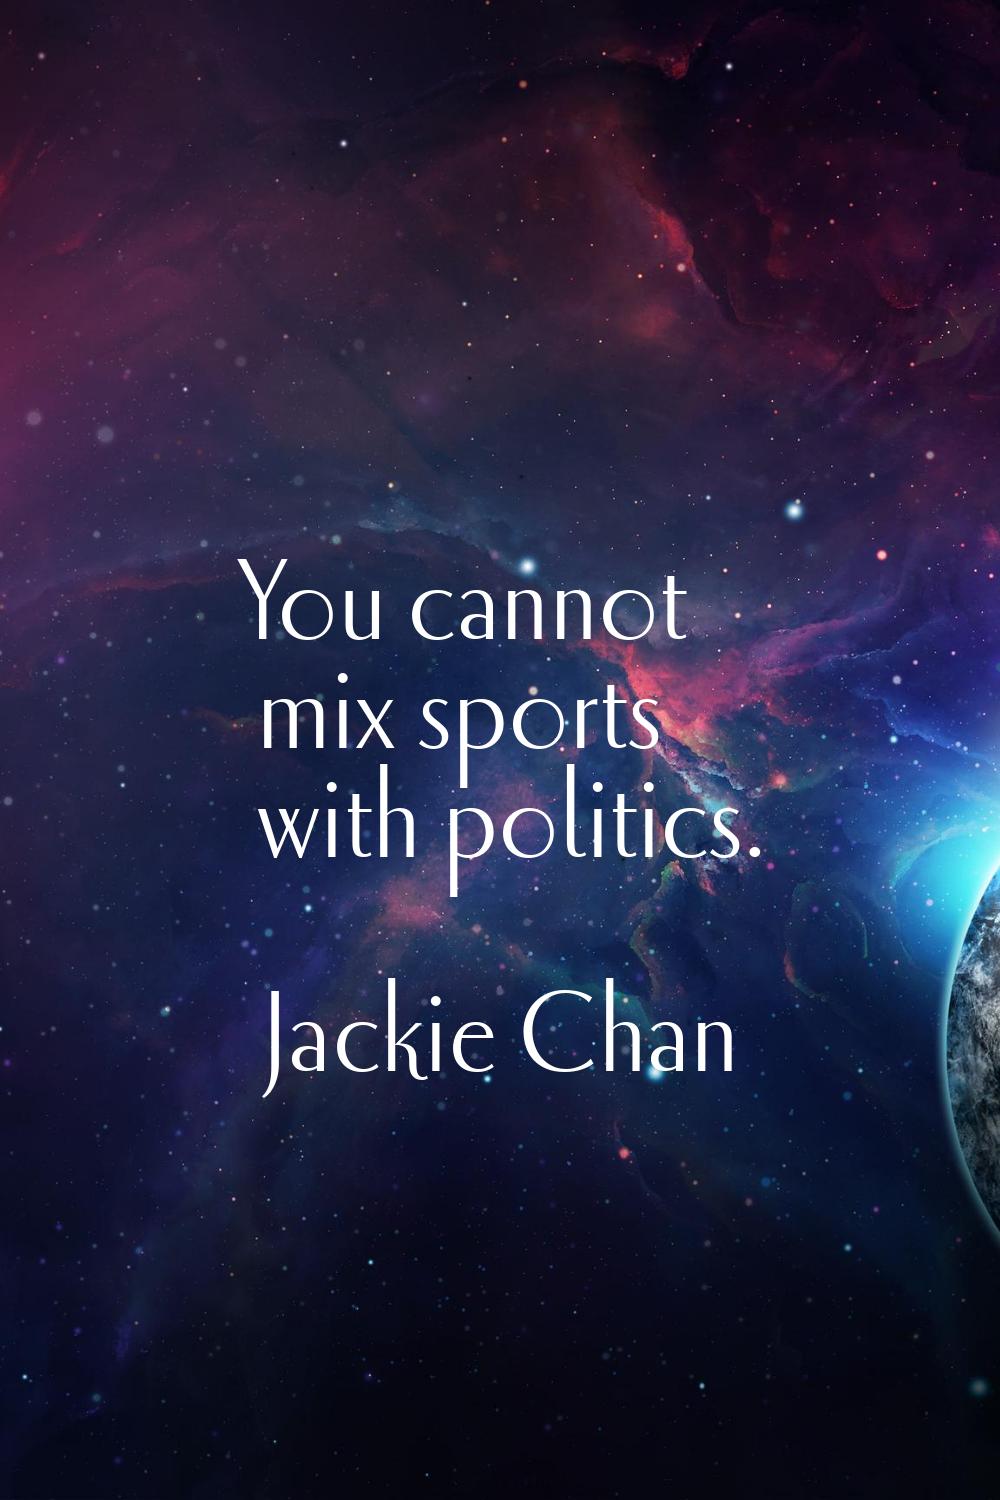 You cannot mix sports with politics.